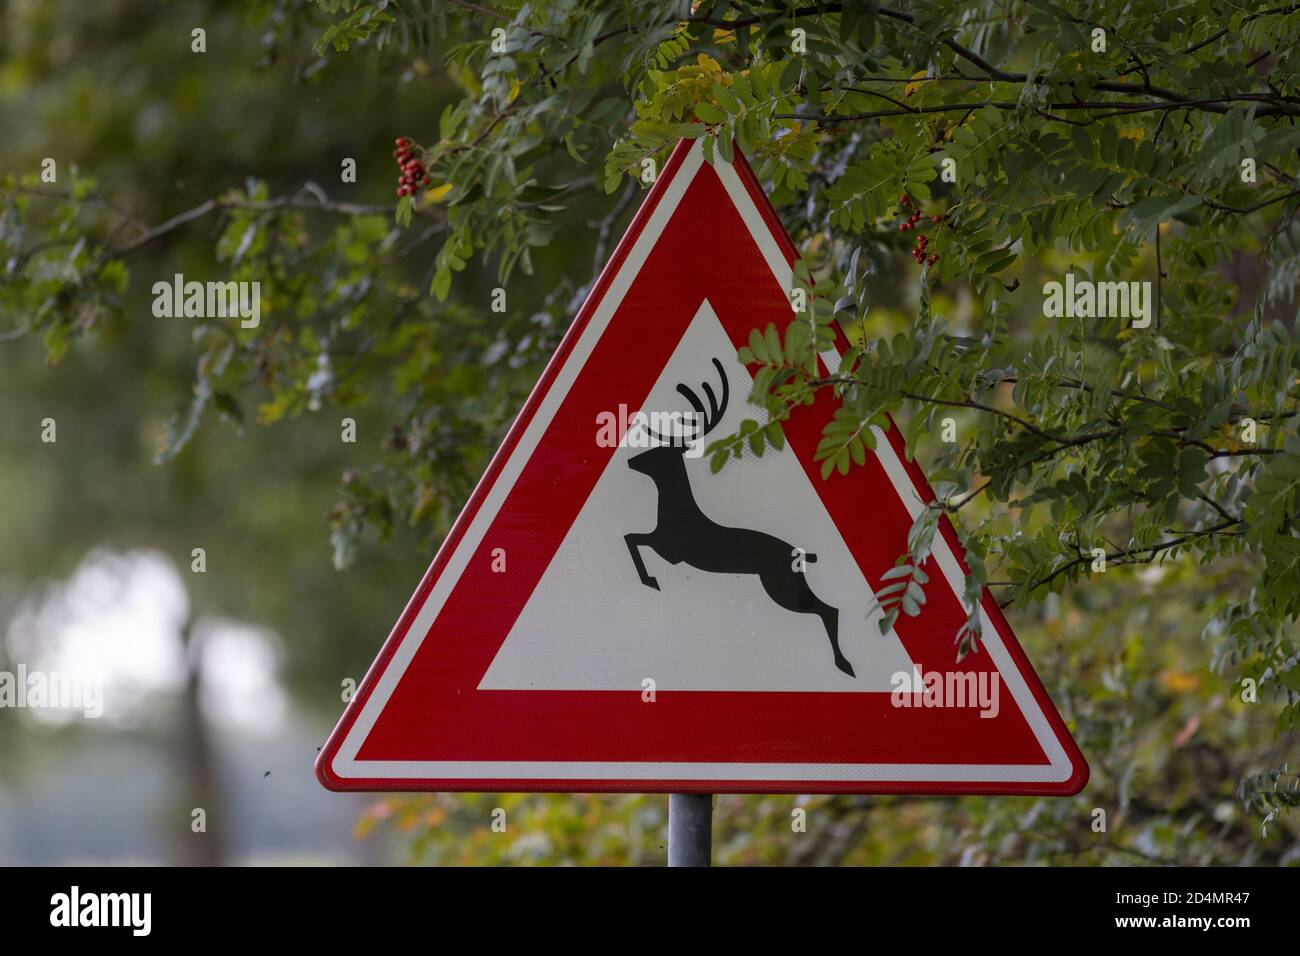 HOGE HEXEL, NETHERLANDS - Oct 02, 2020: Traffic sign coming out of the trees on the side of the road with a deer and red triangle warning for wildlife Stock Photo